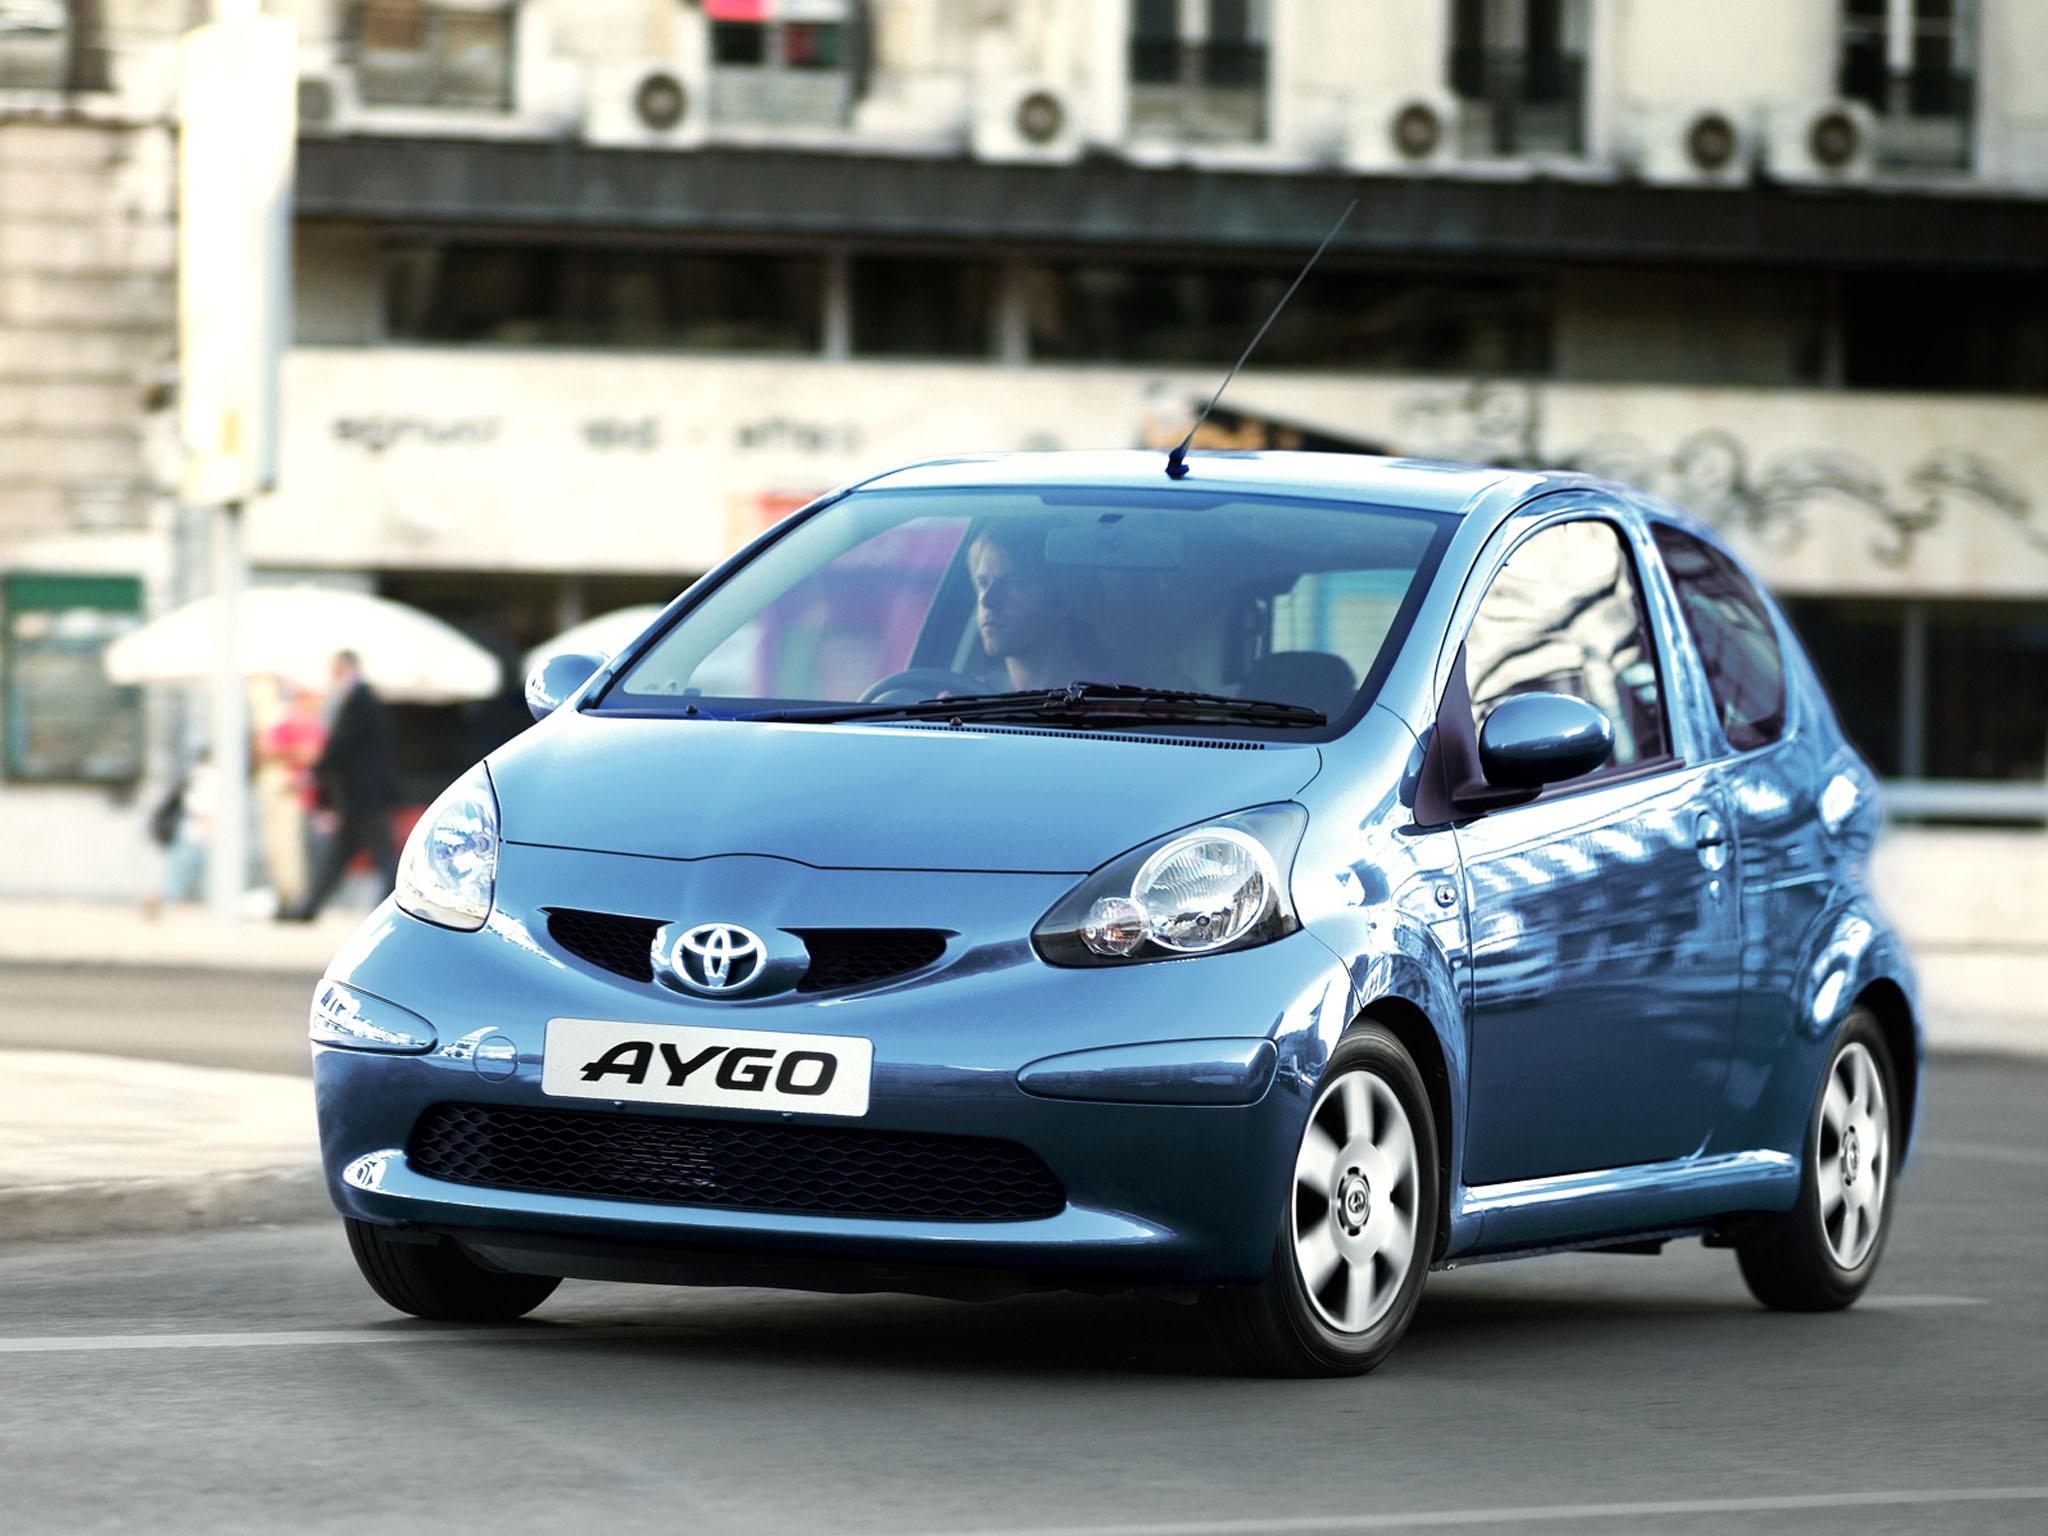 The Toyota Aygo is an obvious choice for the first-time buyer